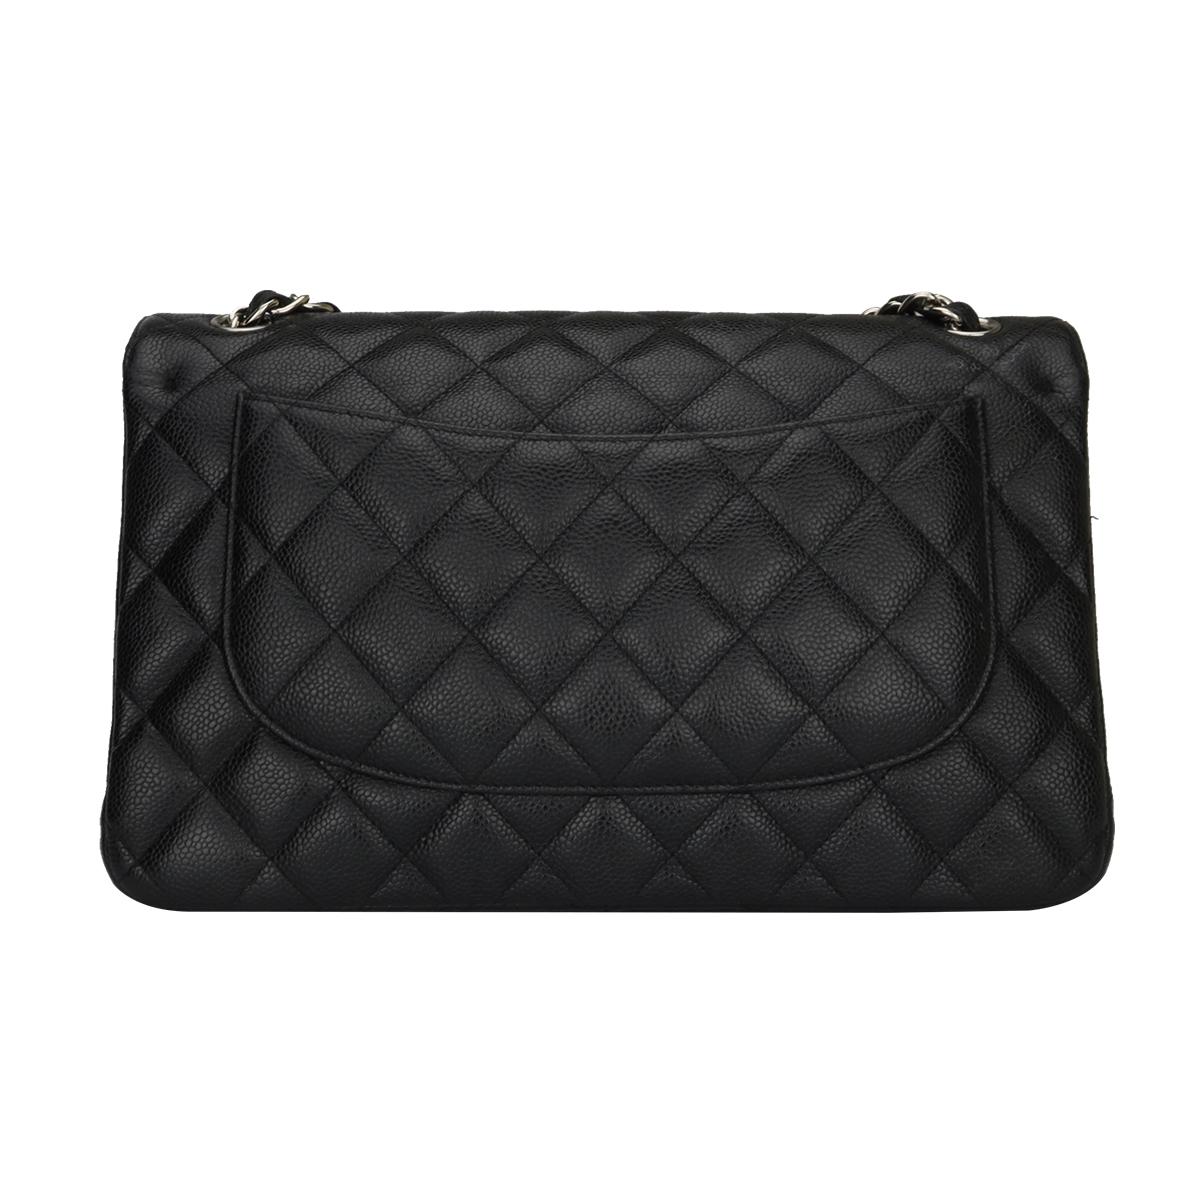 Women's or Men's Chanel Classic Jumbo Black Caviar Double Flap Bag with Silver Hardware, 2013